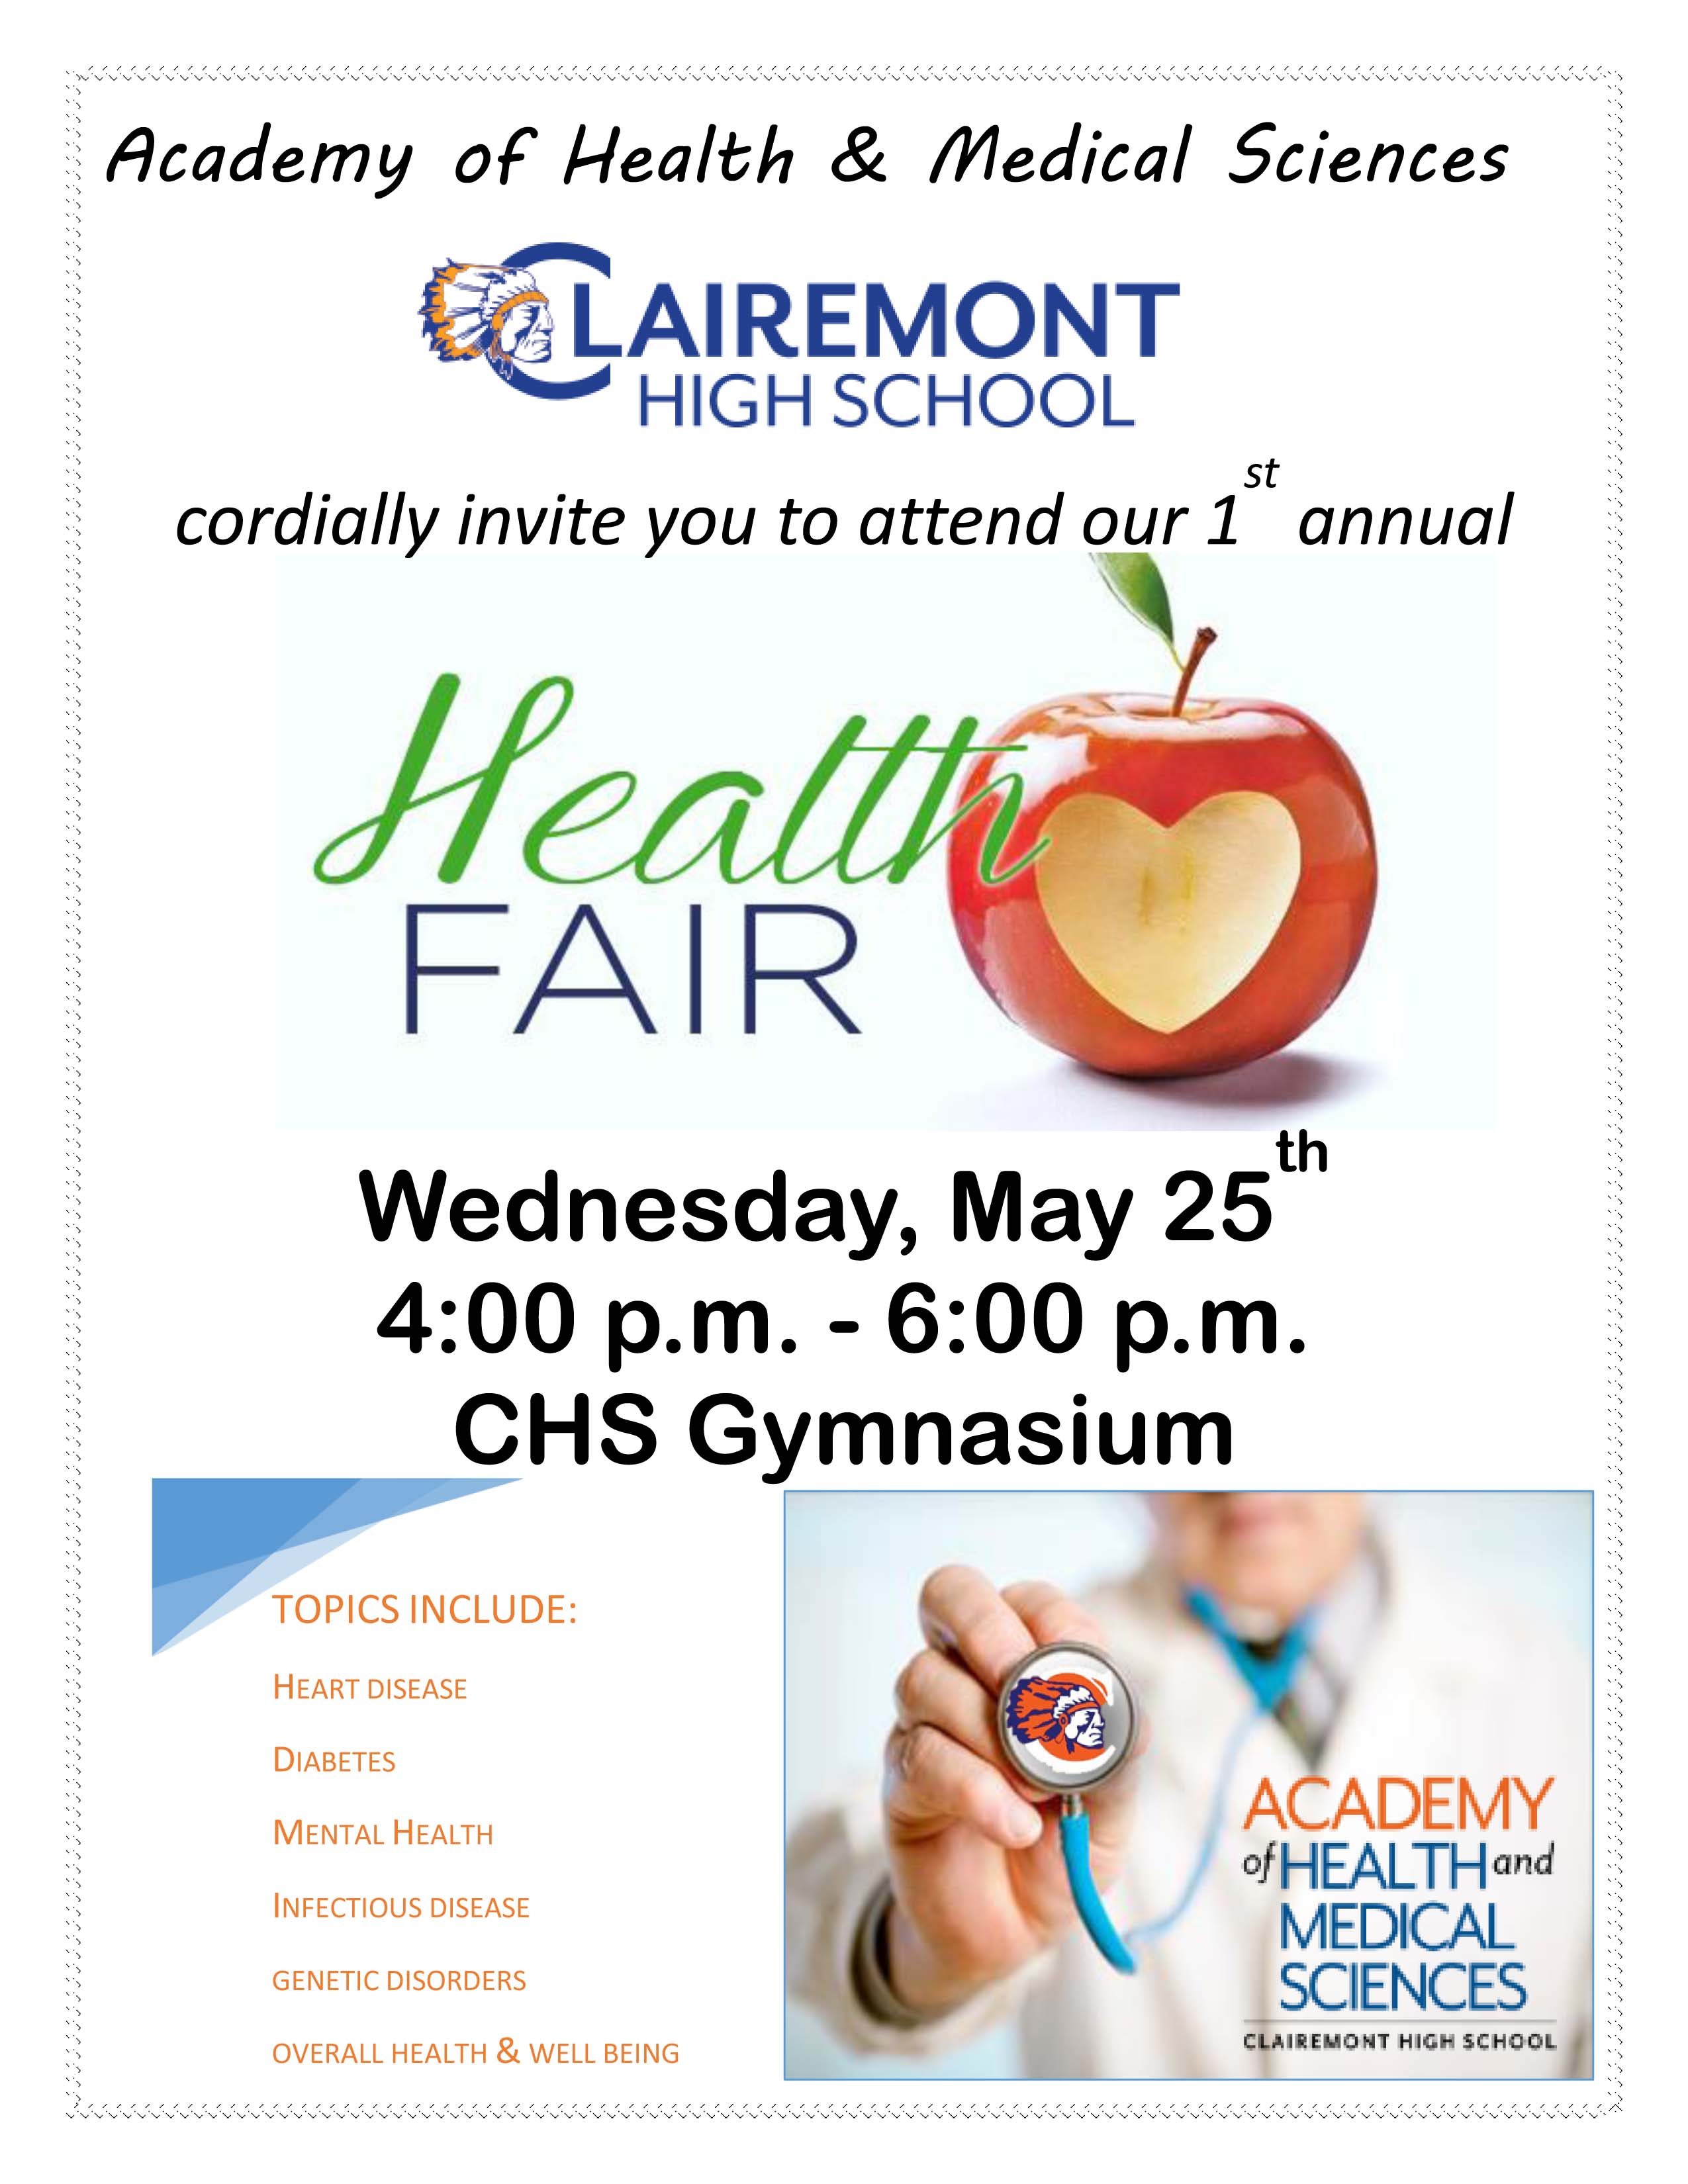 Clairemont High School 9th Graders Hosting Community Health Fair The